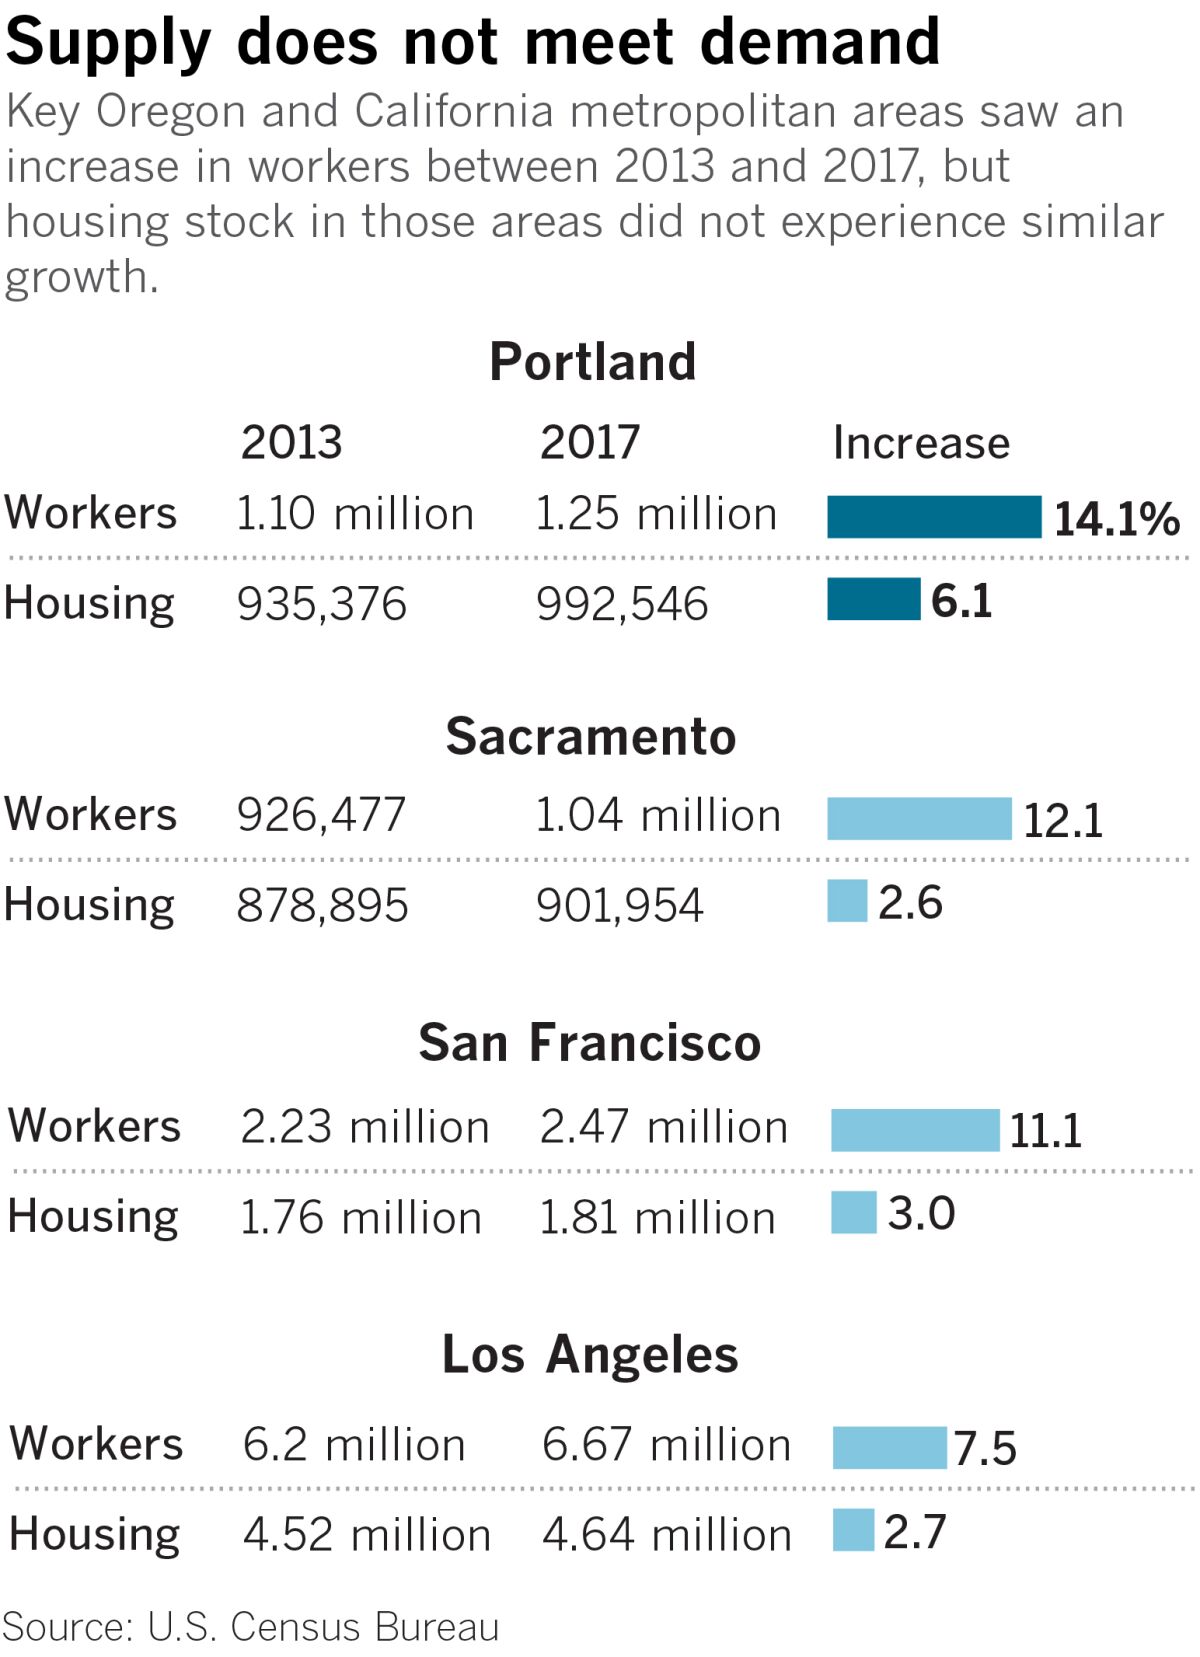 Key Oregon and California metropolitan areas saw an increase in workers between 2013 and 2017, but housing stock in those areas did not experience similar growth